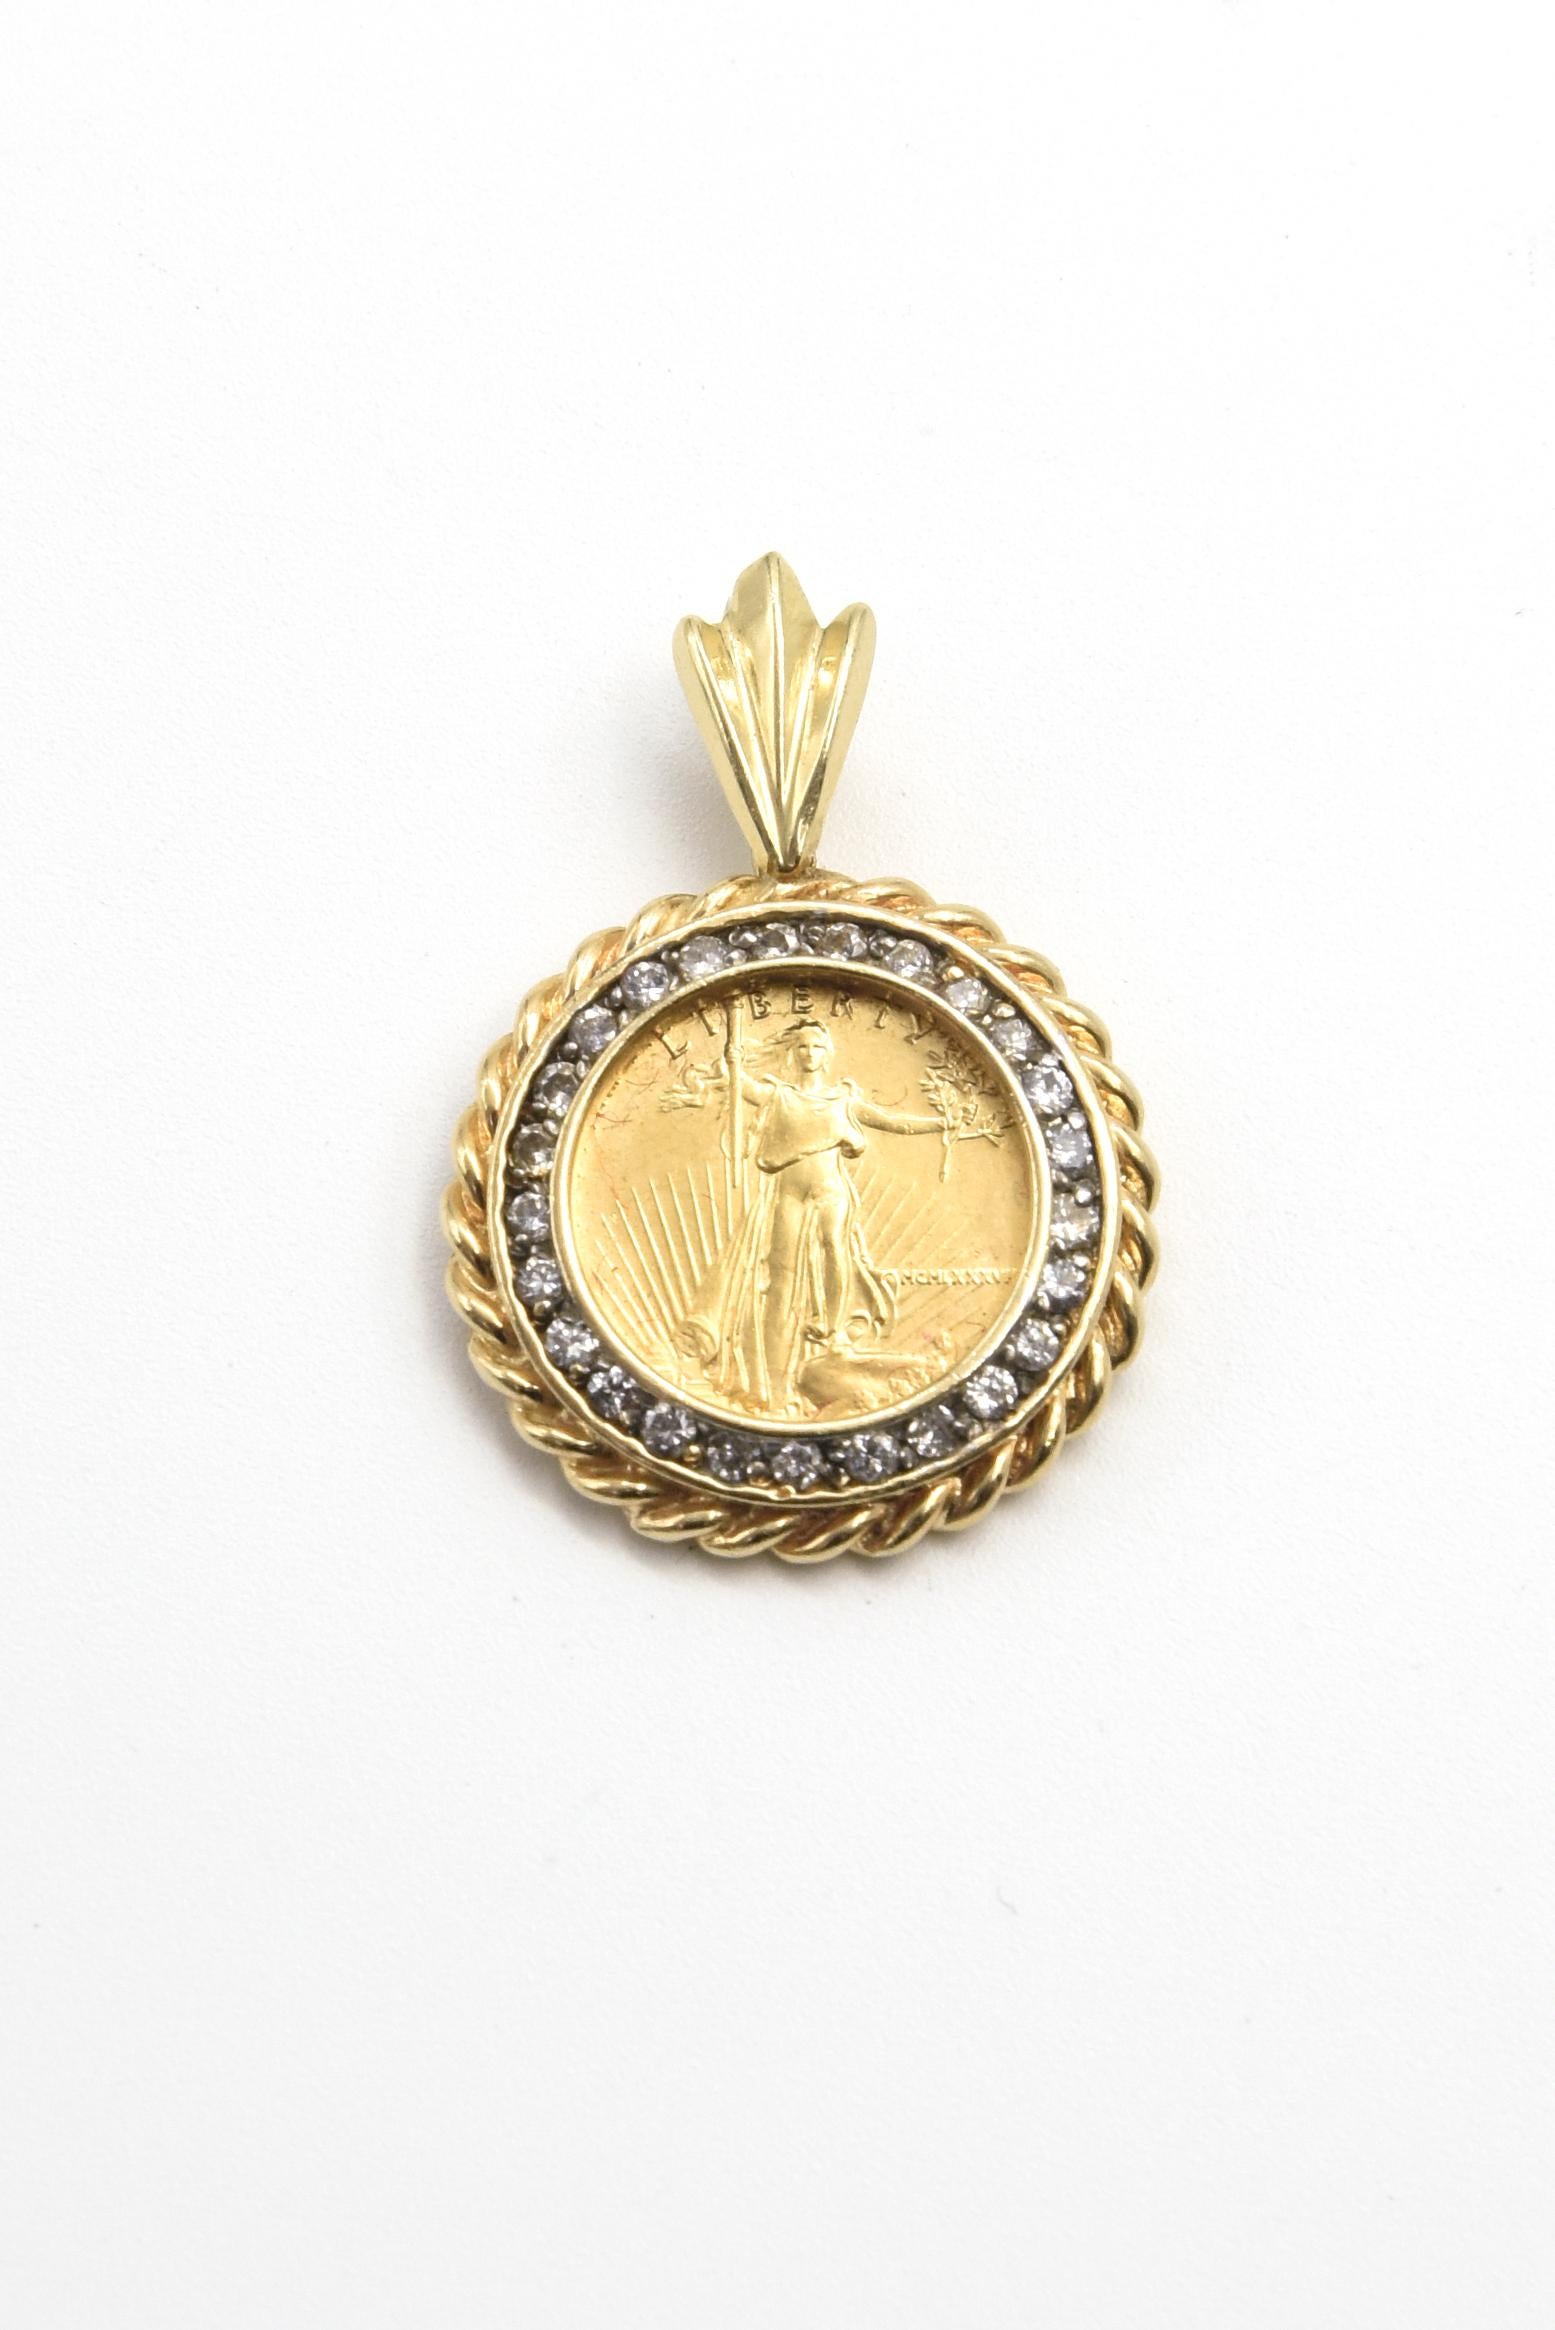 US Liberty $5 Coin has been bezel set in a 14k yellow gold frame that contains 25 prong set full cut diamonds weighting approximately .02 carats each for a total approximate weight of .50 carats.  The diamonds are H-I color I1-I2 clarity.  The coin